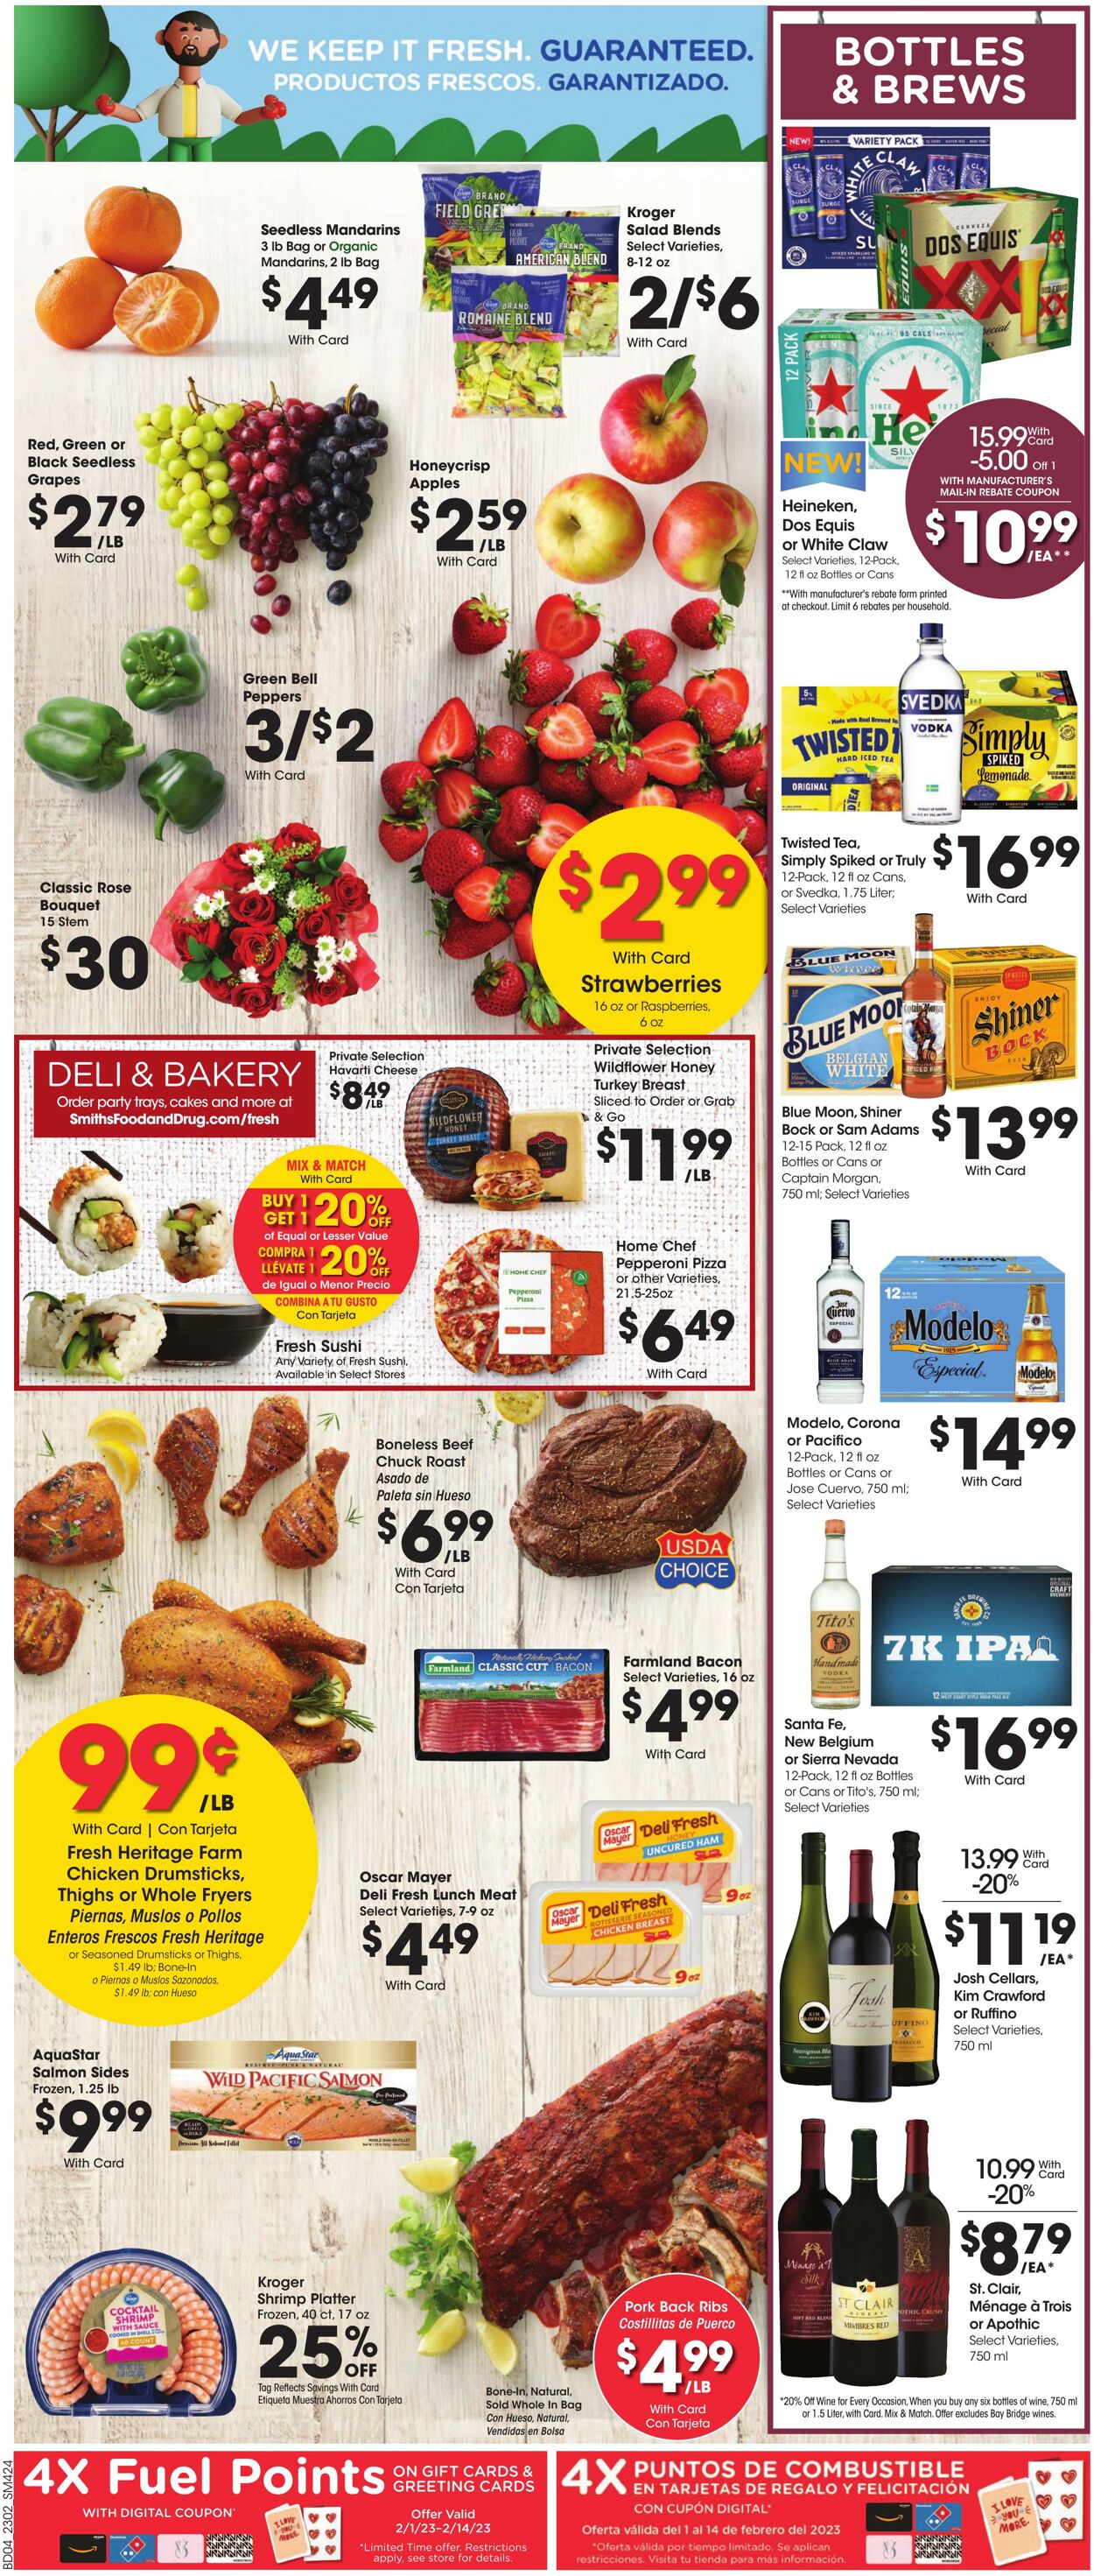 Weekly ad Smith’s Food and Drug 02/08/2023 - 02/14/2023